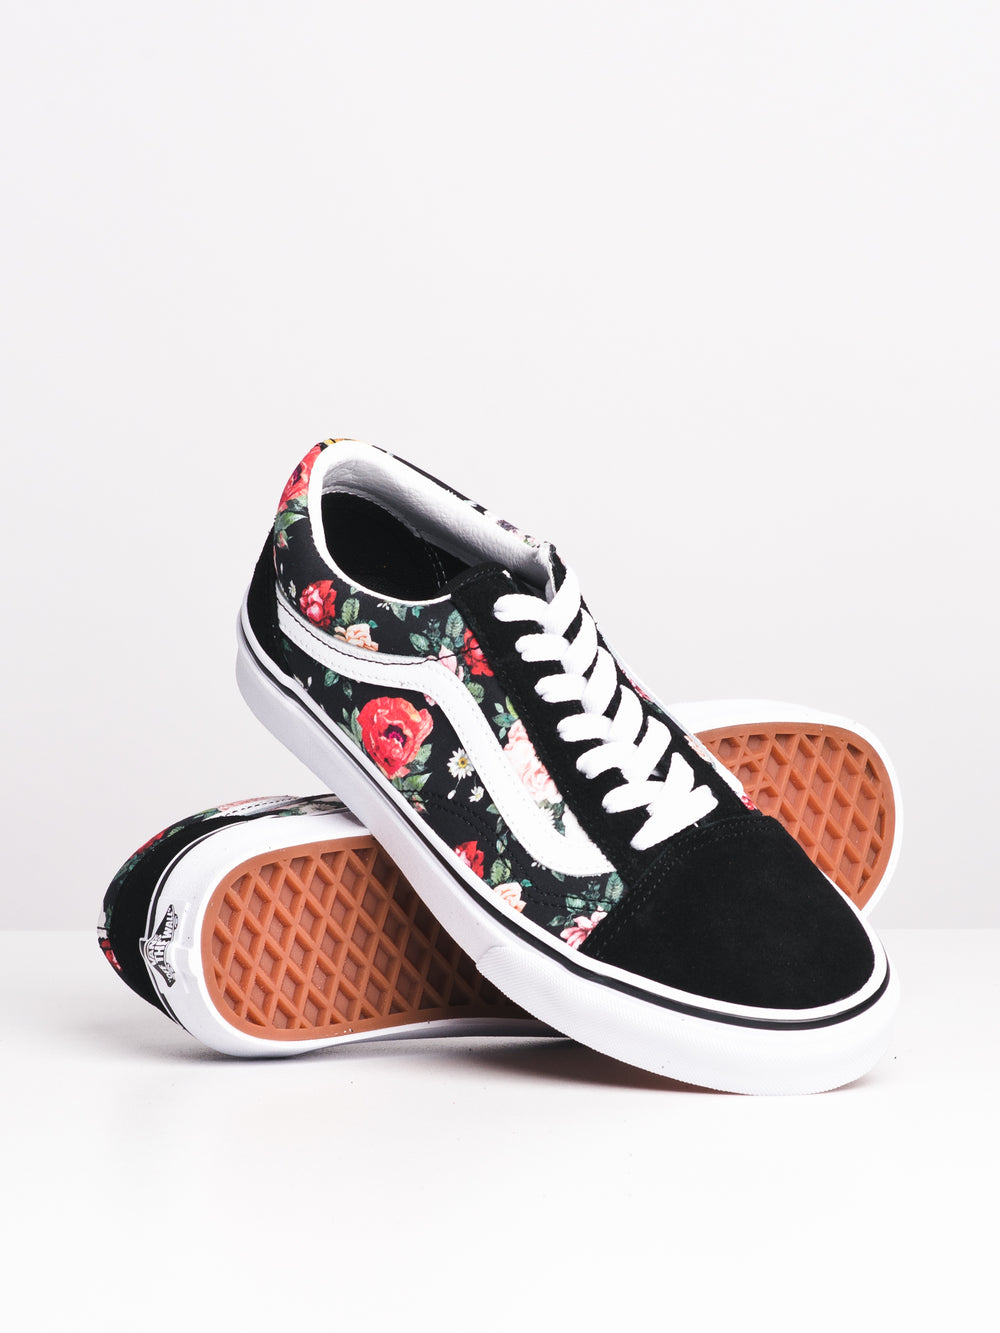 WOMENS OLD SKOOL - GARDEN FLORAL - CLEARANCE